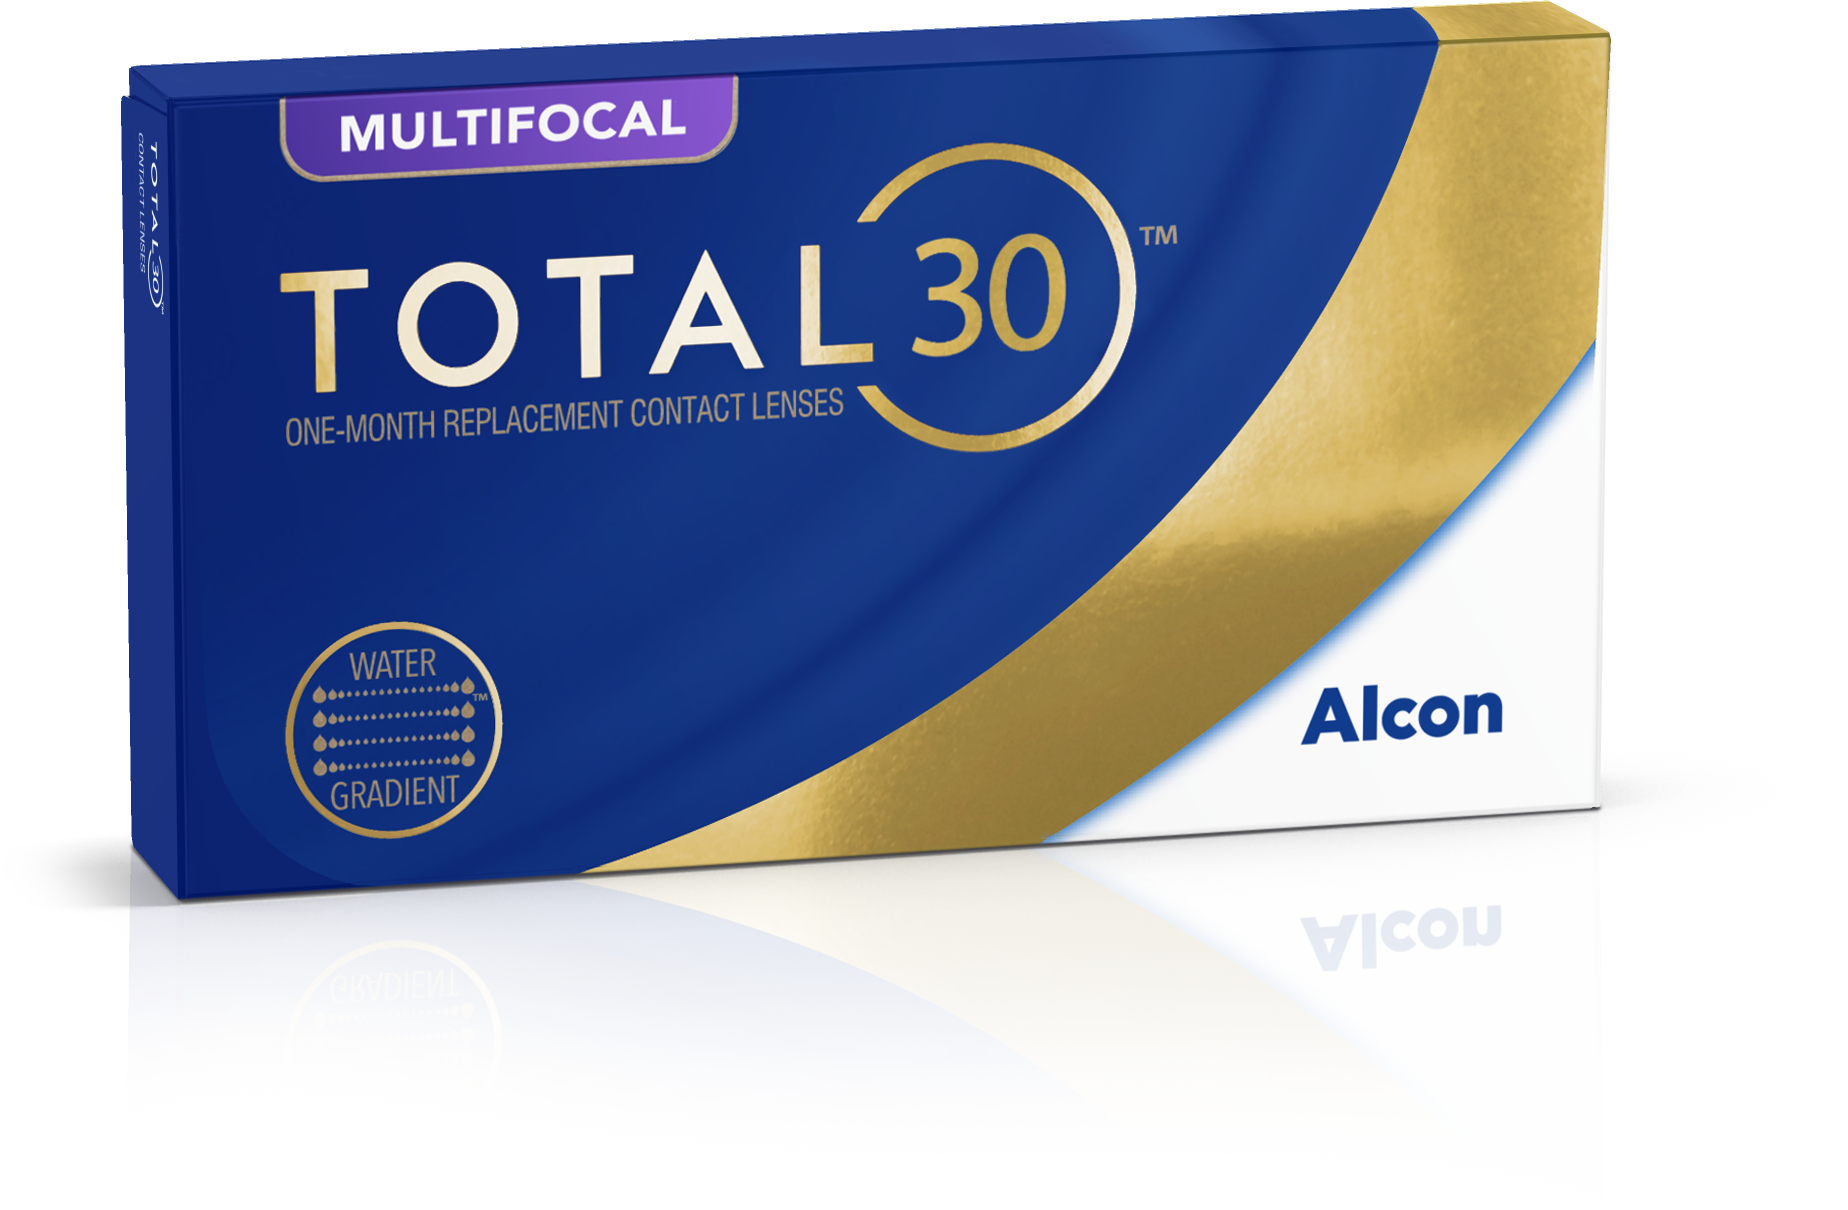 box shot of new total 30 multifocal contact lenses